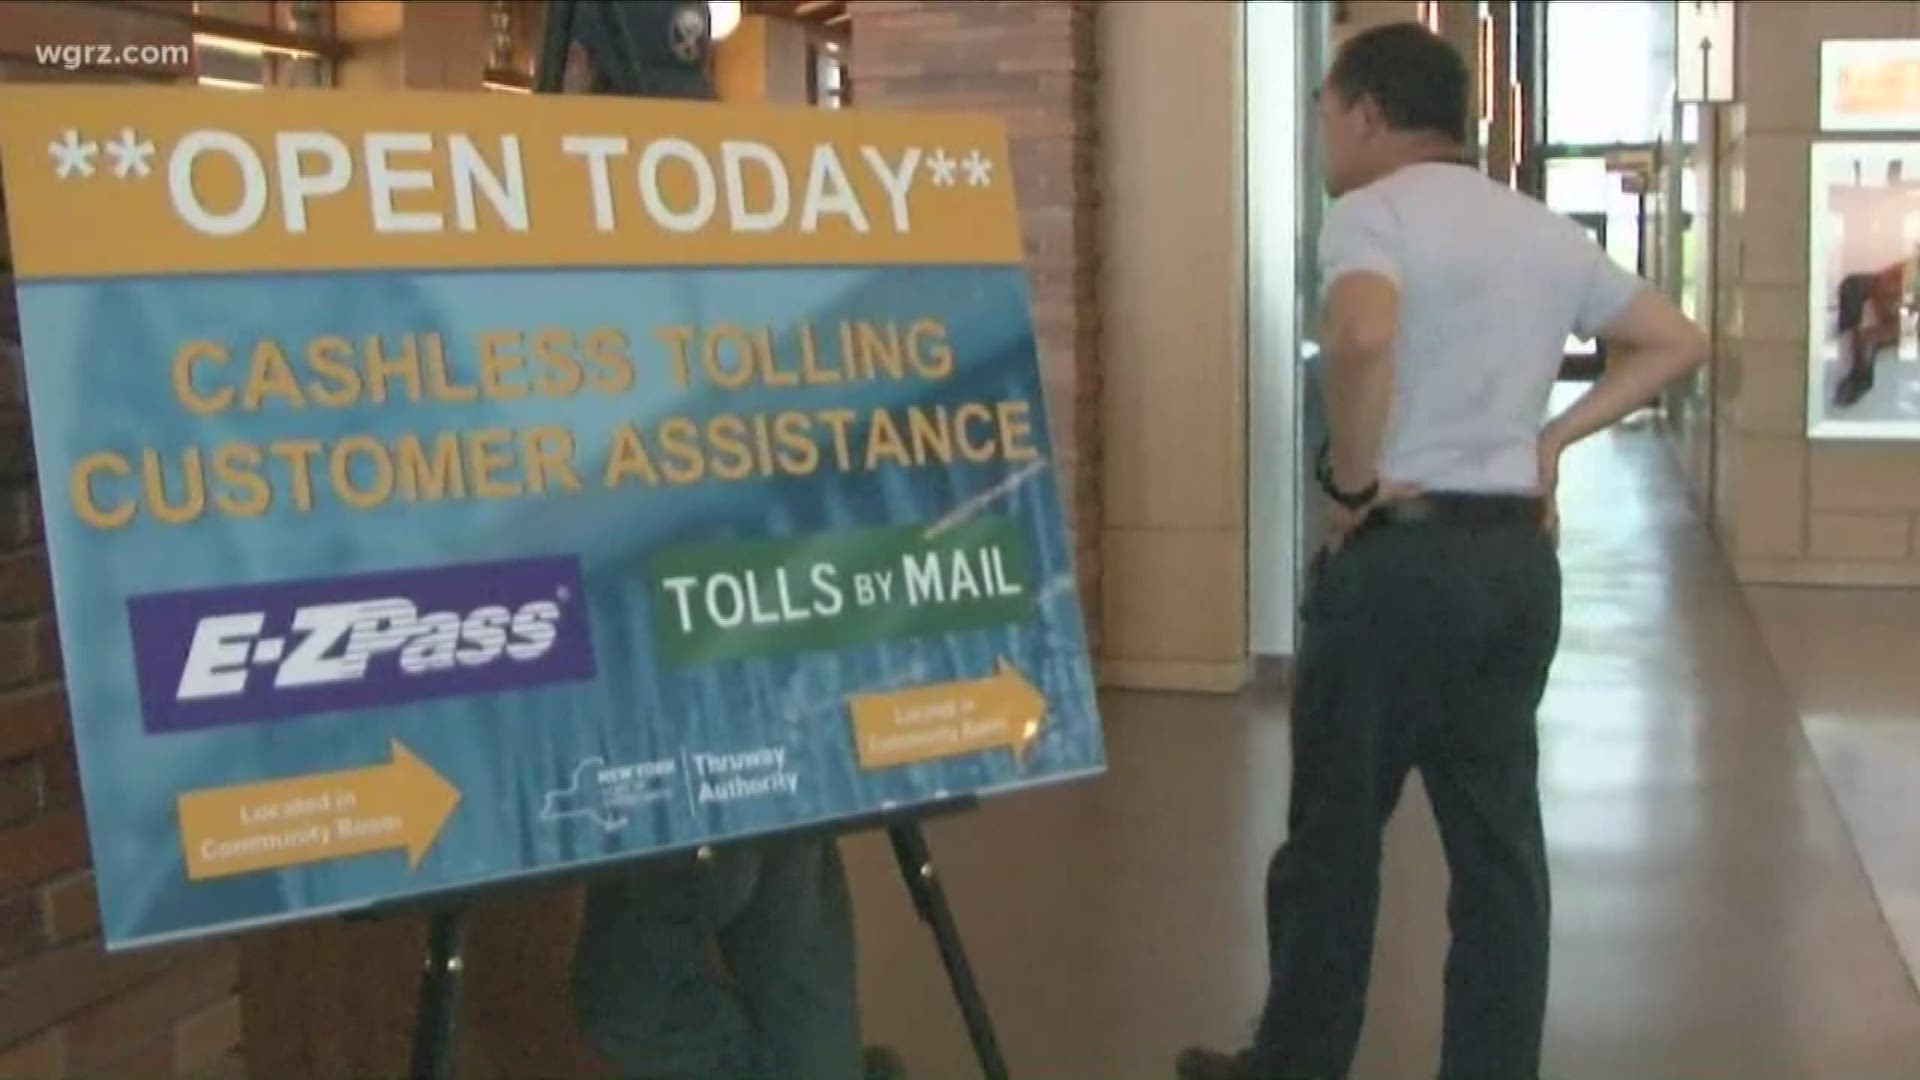 Getting help with cashless tolls